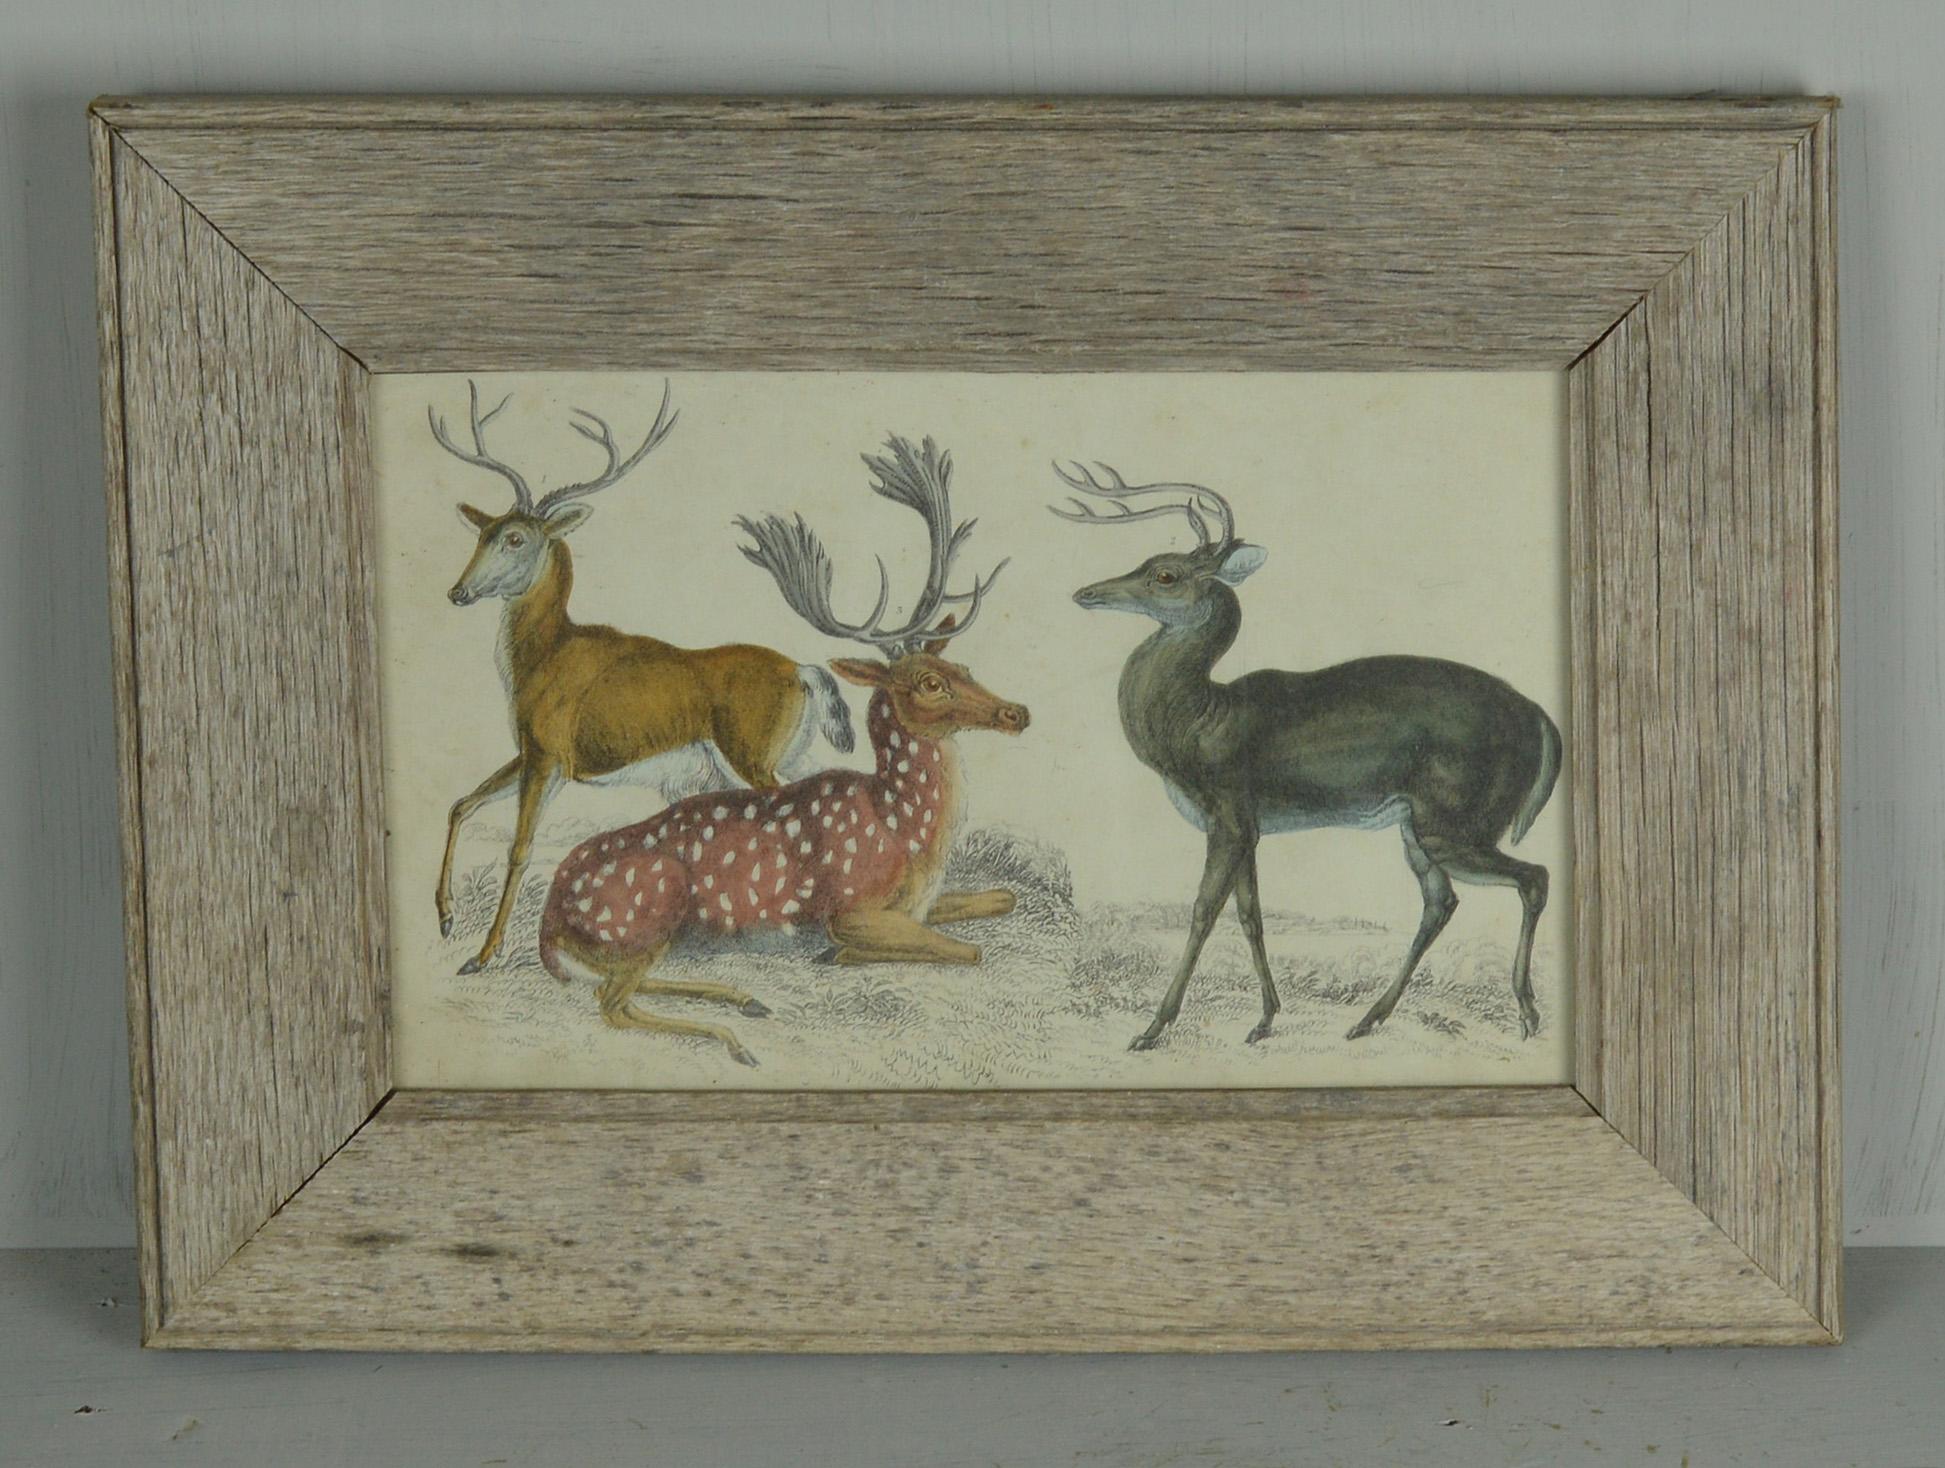 Great image of deer

Hand-colored lithograph.

Original color.

From Goldsmith's Animated Nature.

Published by Fullarton, London and Edinburgh, 1847.

Presented in a distressed bleached oak frame.

The measurement given below is the